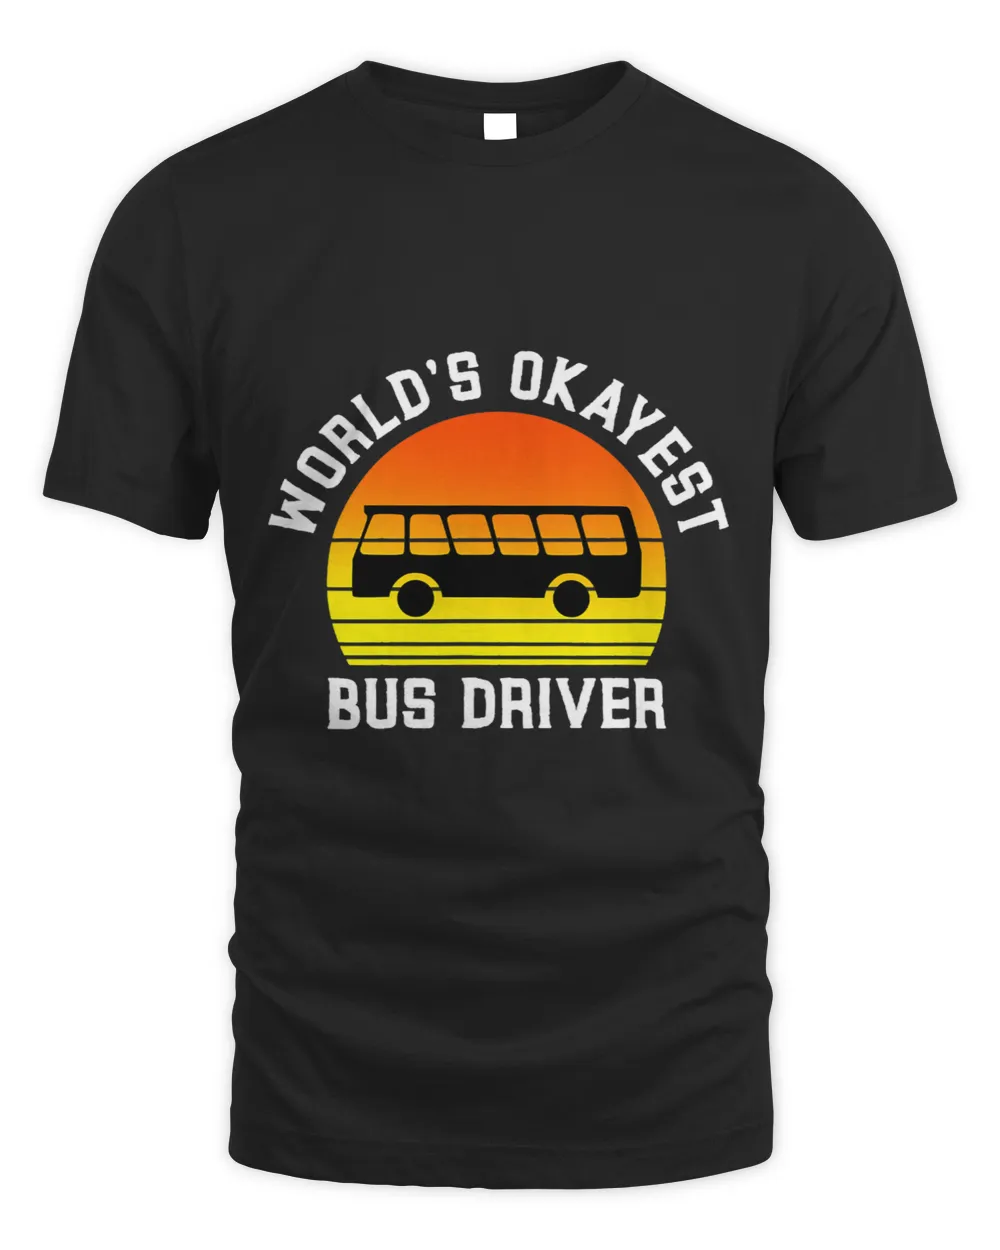 Worlds Okayest Bus Driver Future Transport Worker Lover